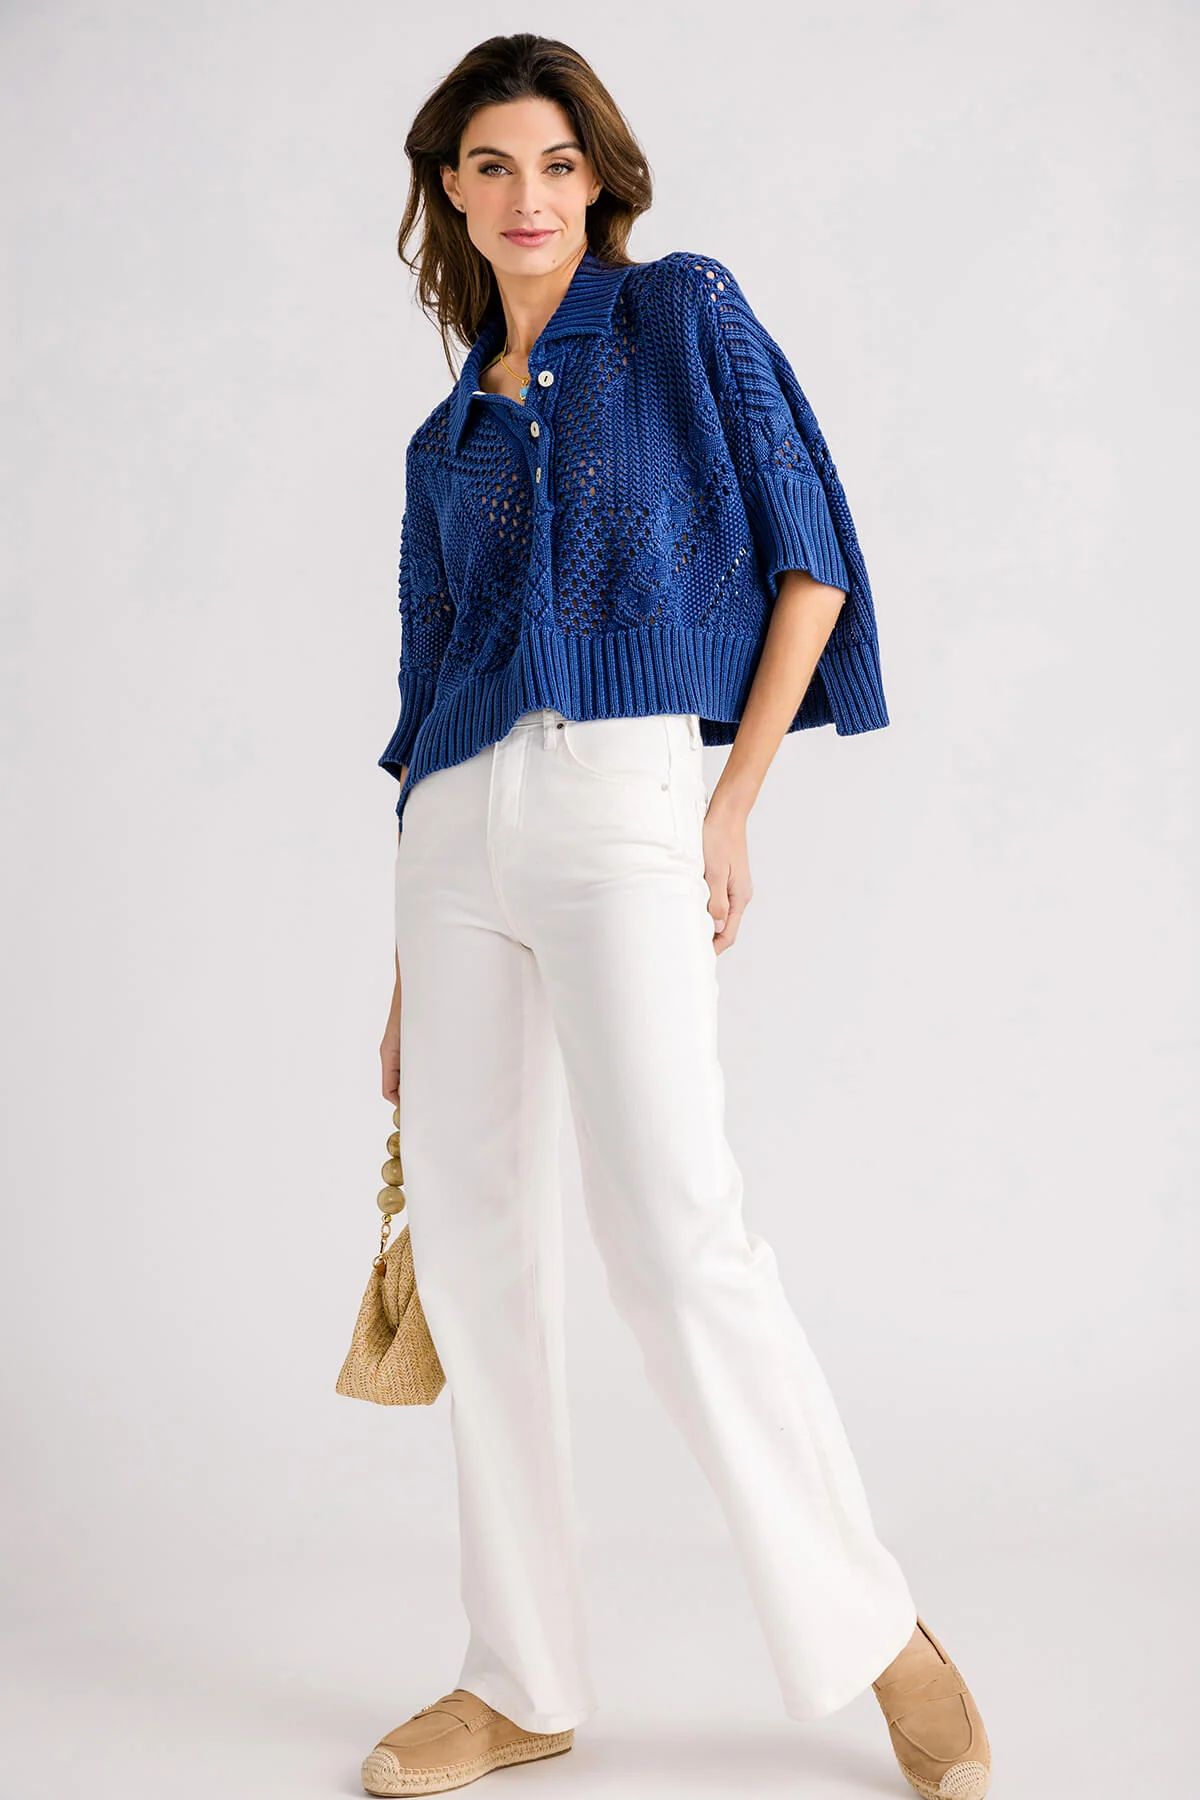 Free People To The Point Crochet Polo | Social Threads